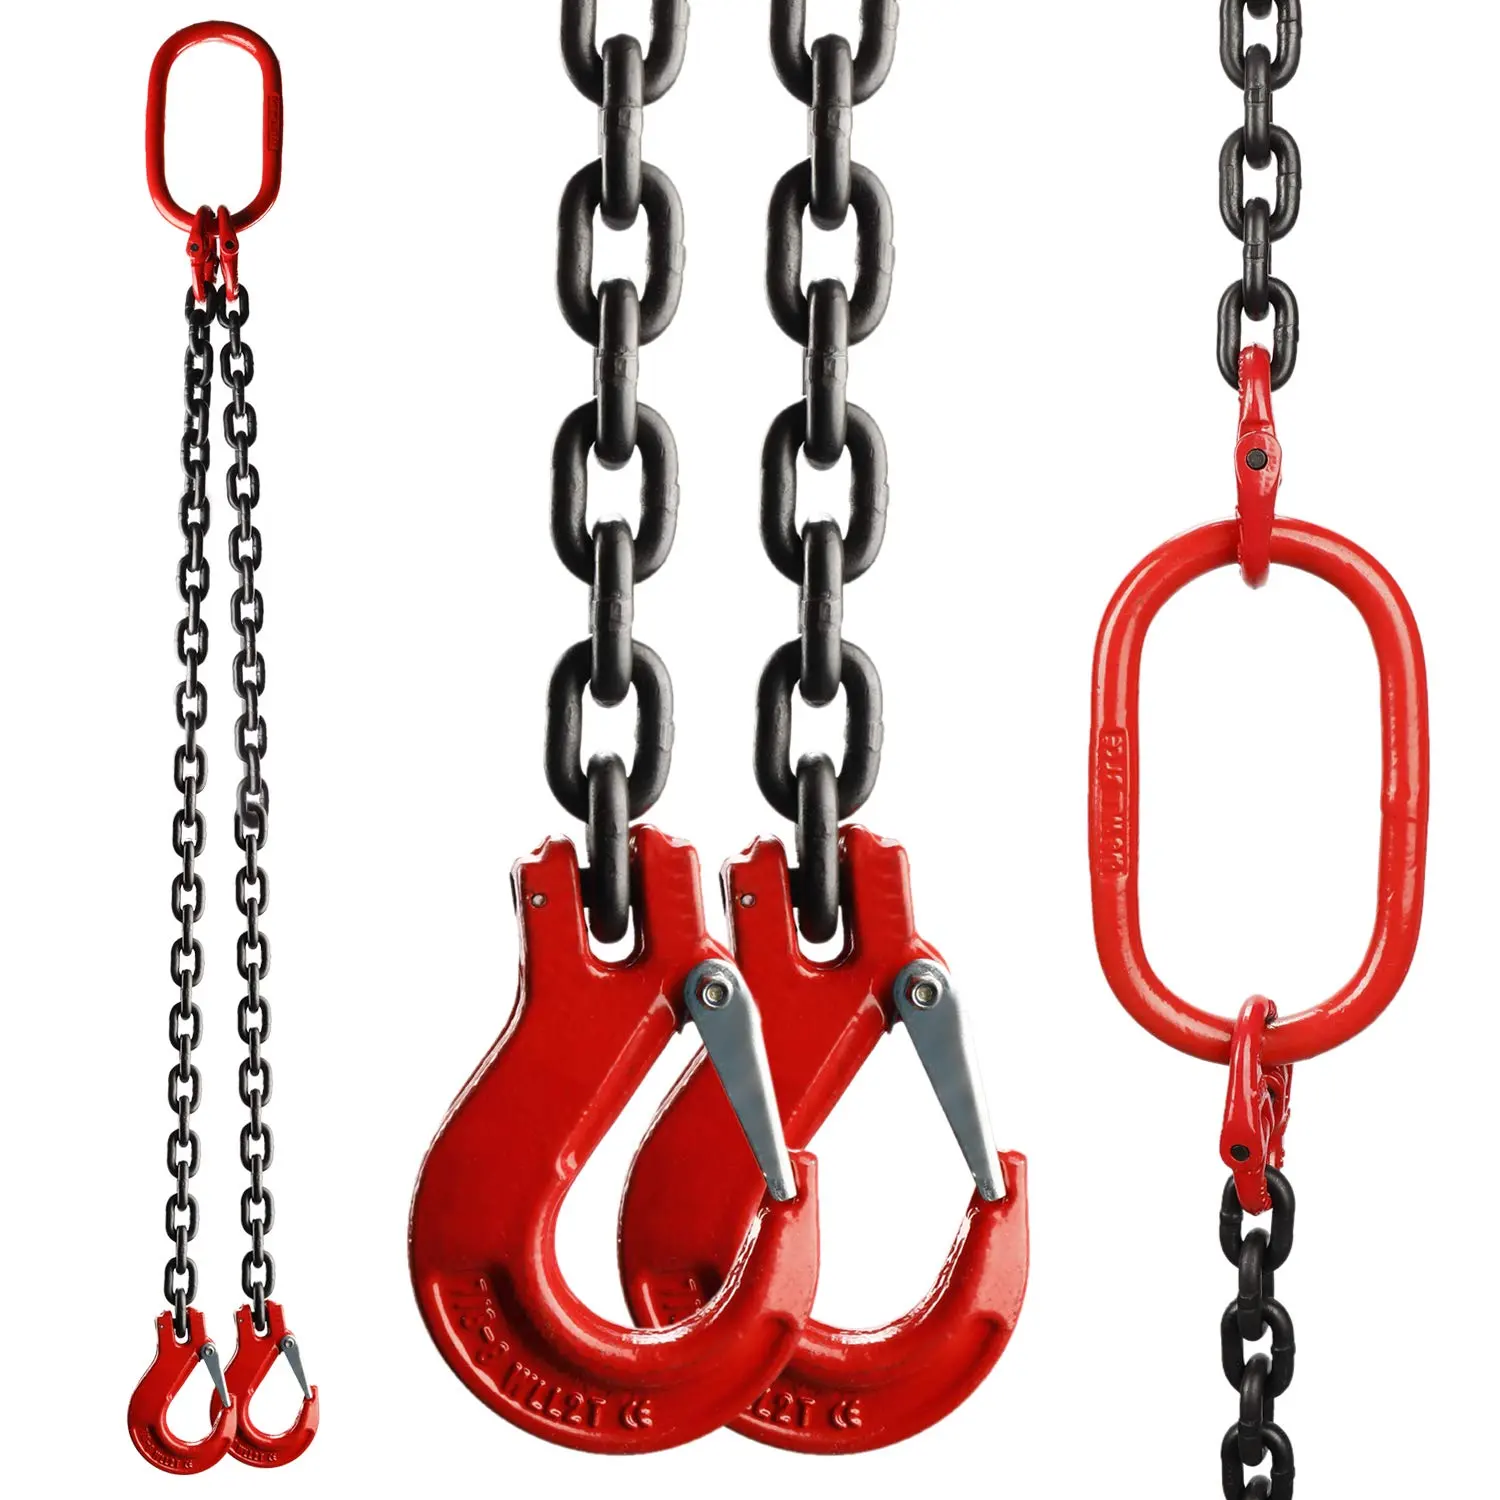 Industrial chain 4 legs lifting towing tie chains riging truck trailer hanging chain sling